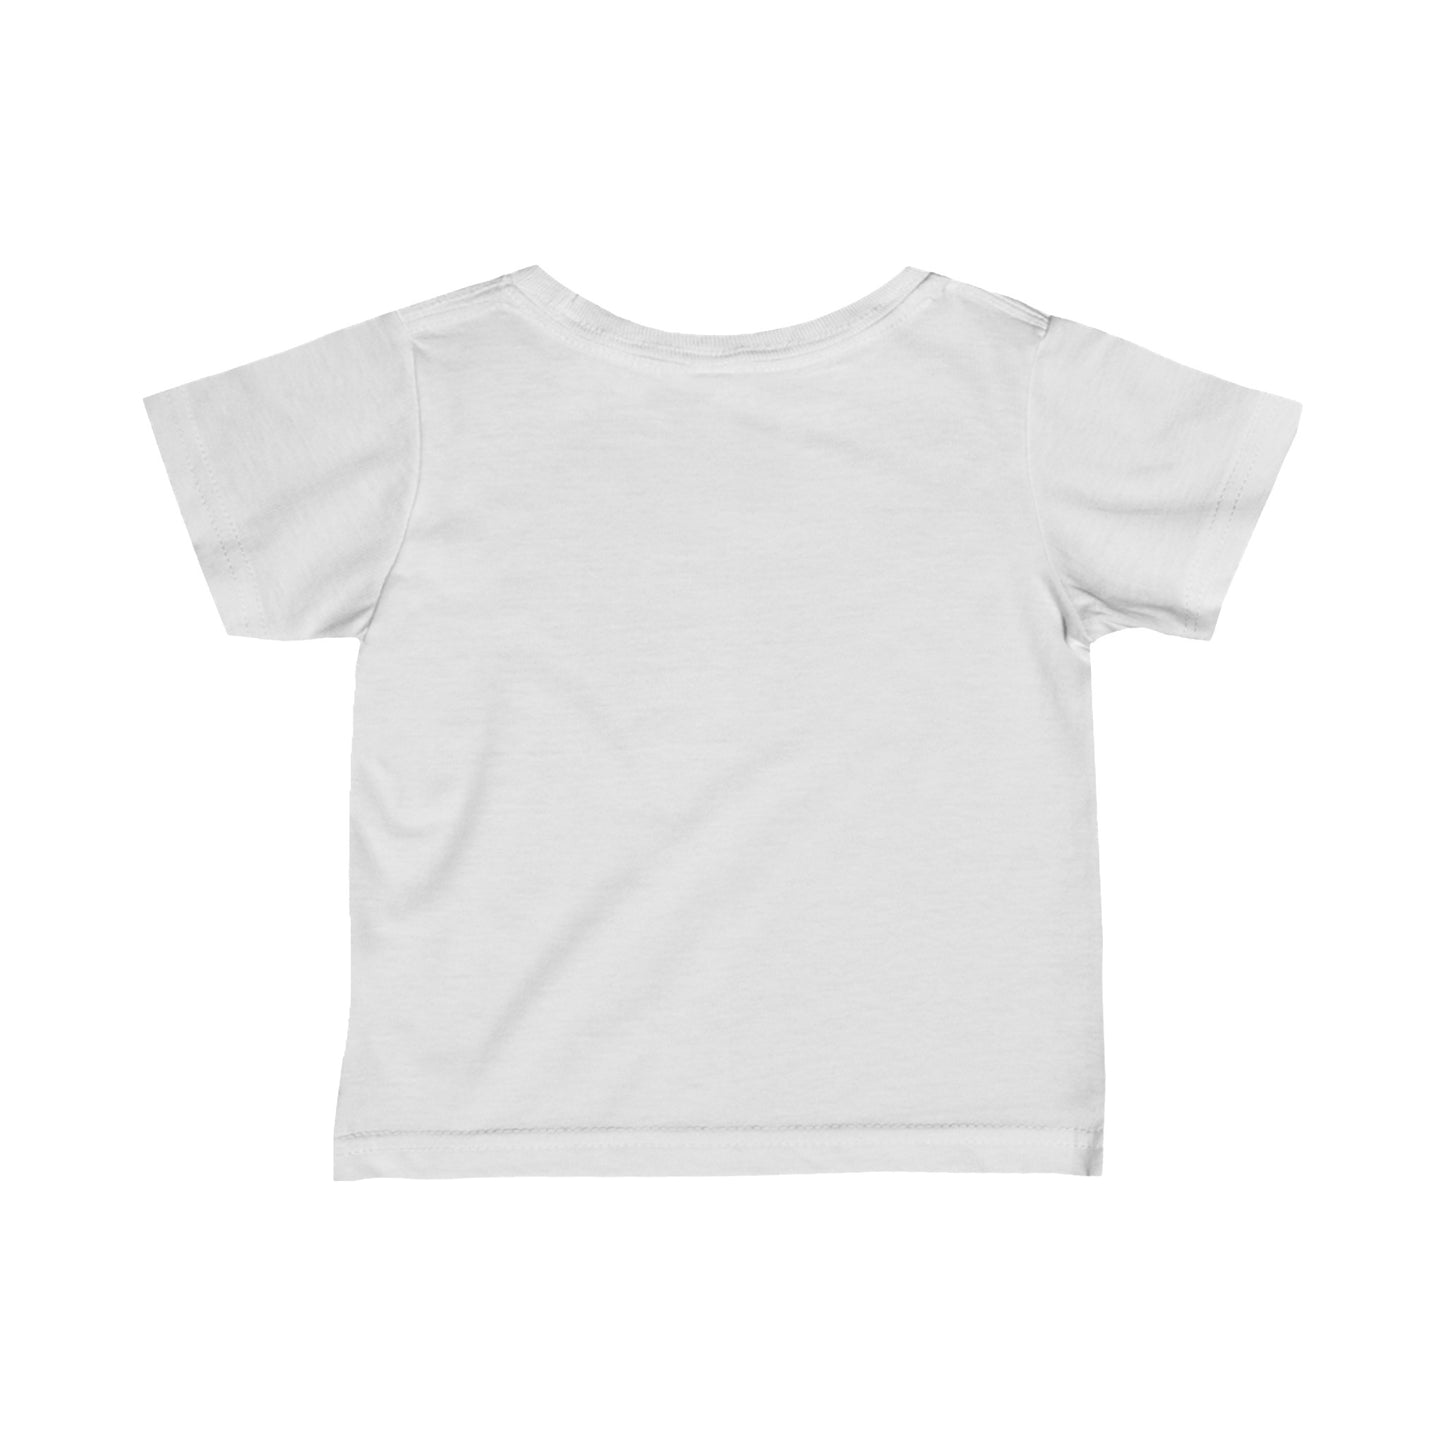 Intersex Pride Graphic Infant T-Shirt (Perfect for babies who are born intersex!)